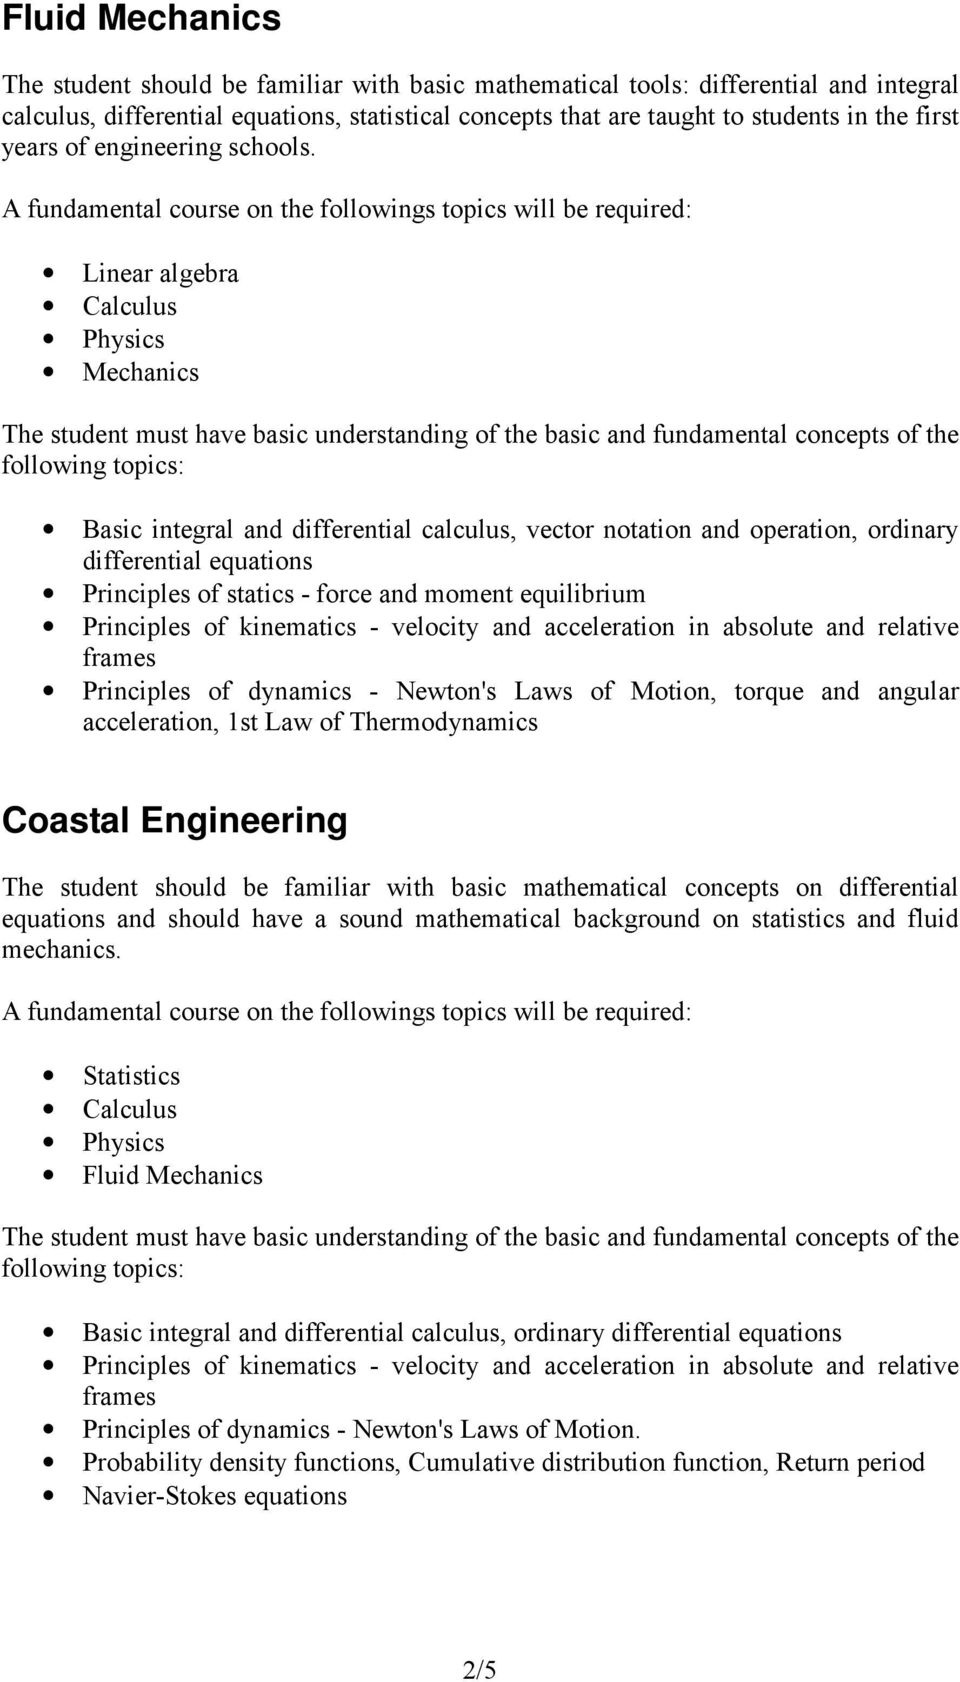 Coastal Engineering The student should be familiar with basic mathematical concepts on differential equations and should have a sound mathematical background on statistics and fluid mechanics.